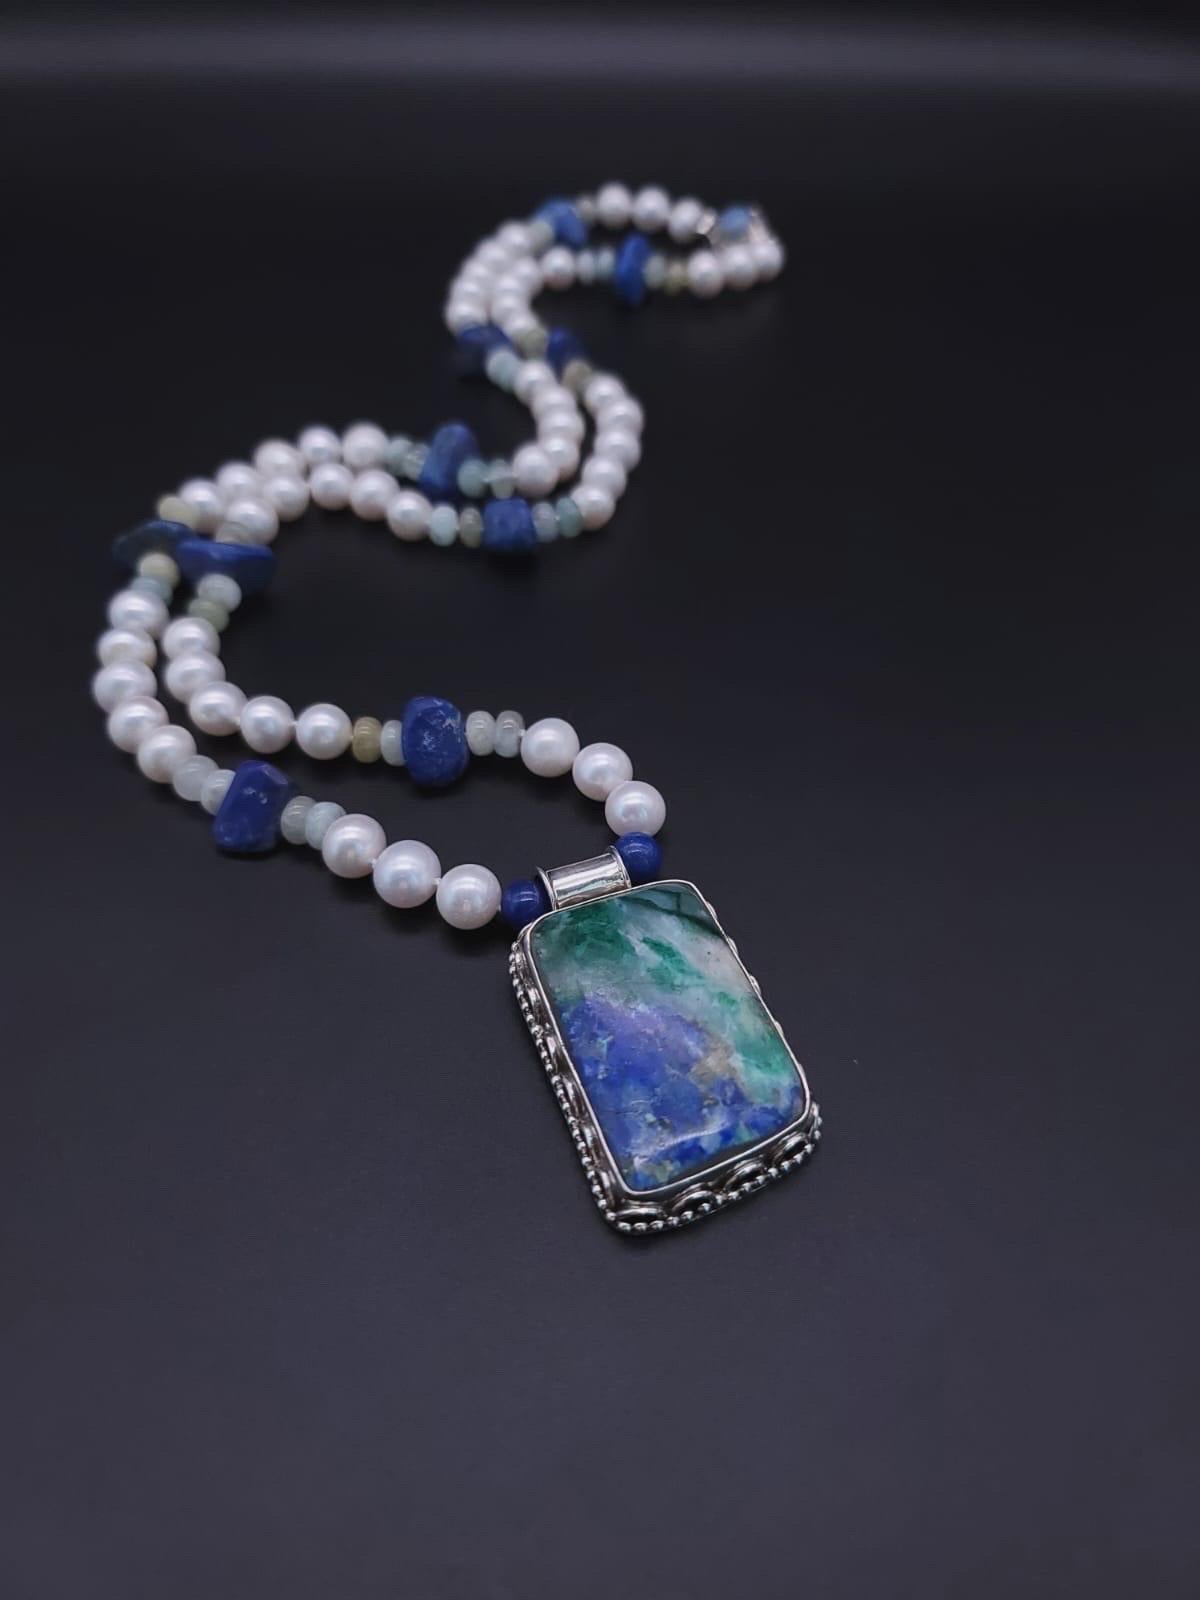 A.Jeschel Stunning Chrysocolla pendant necklace For Sale 13